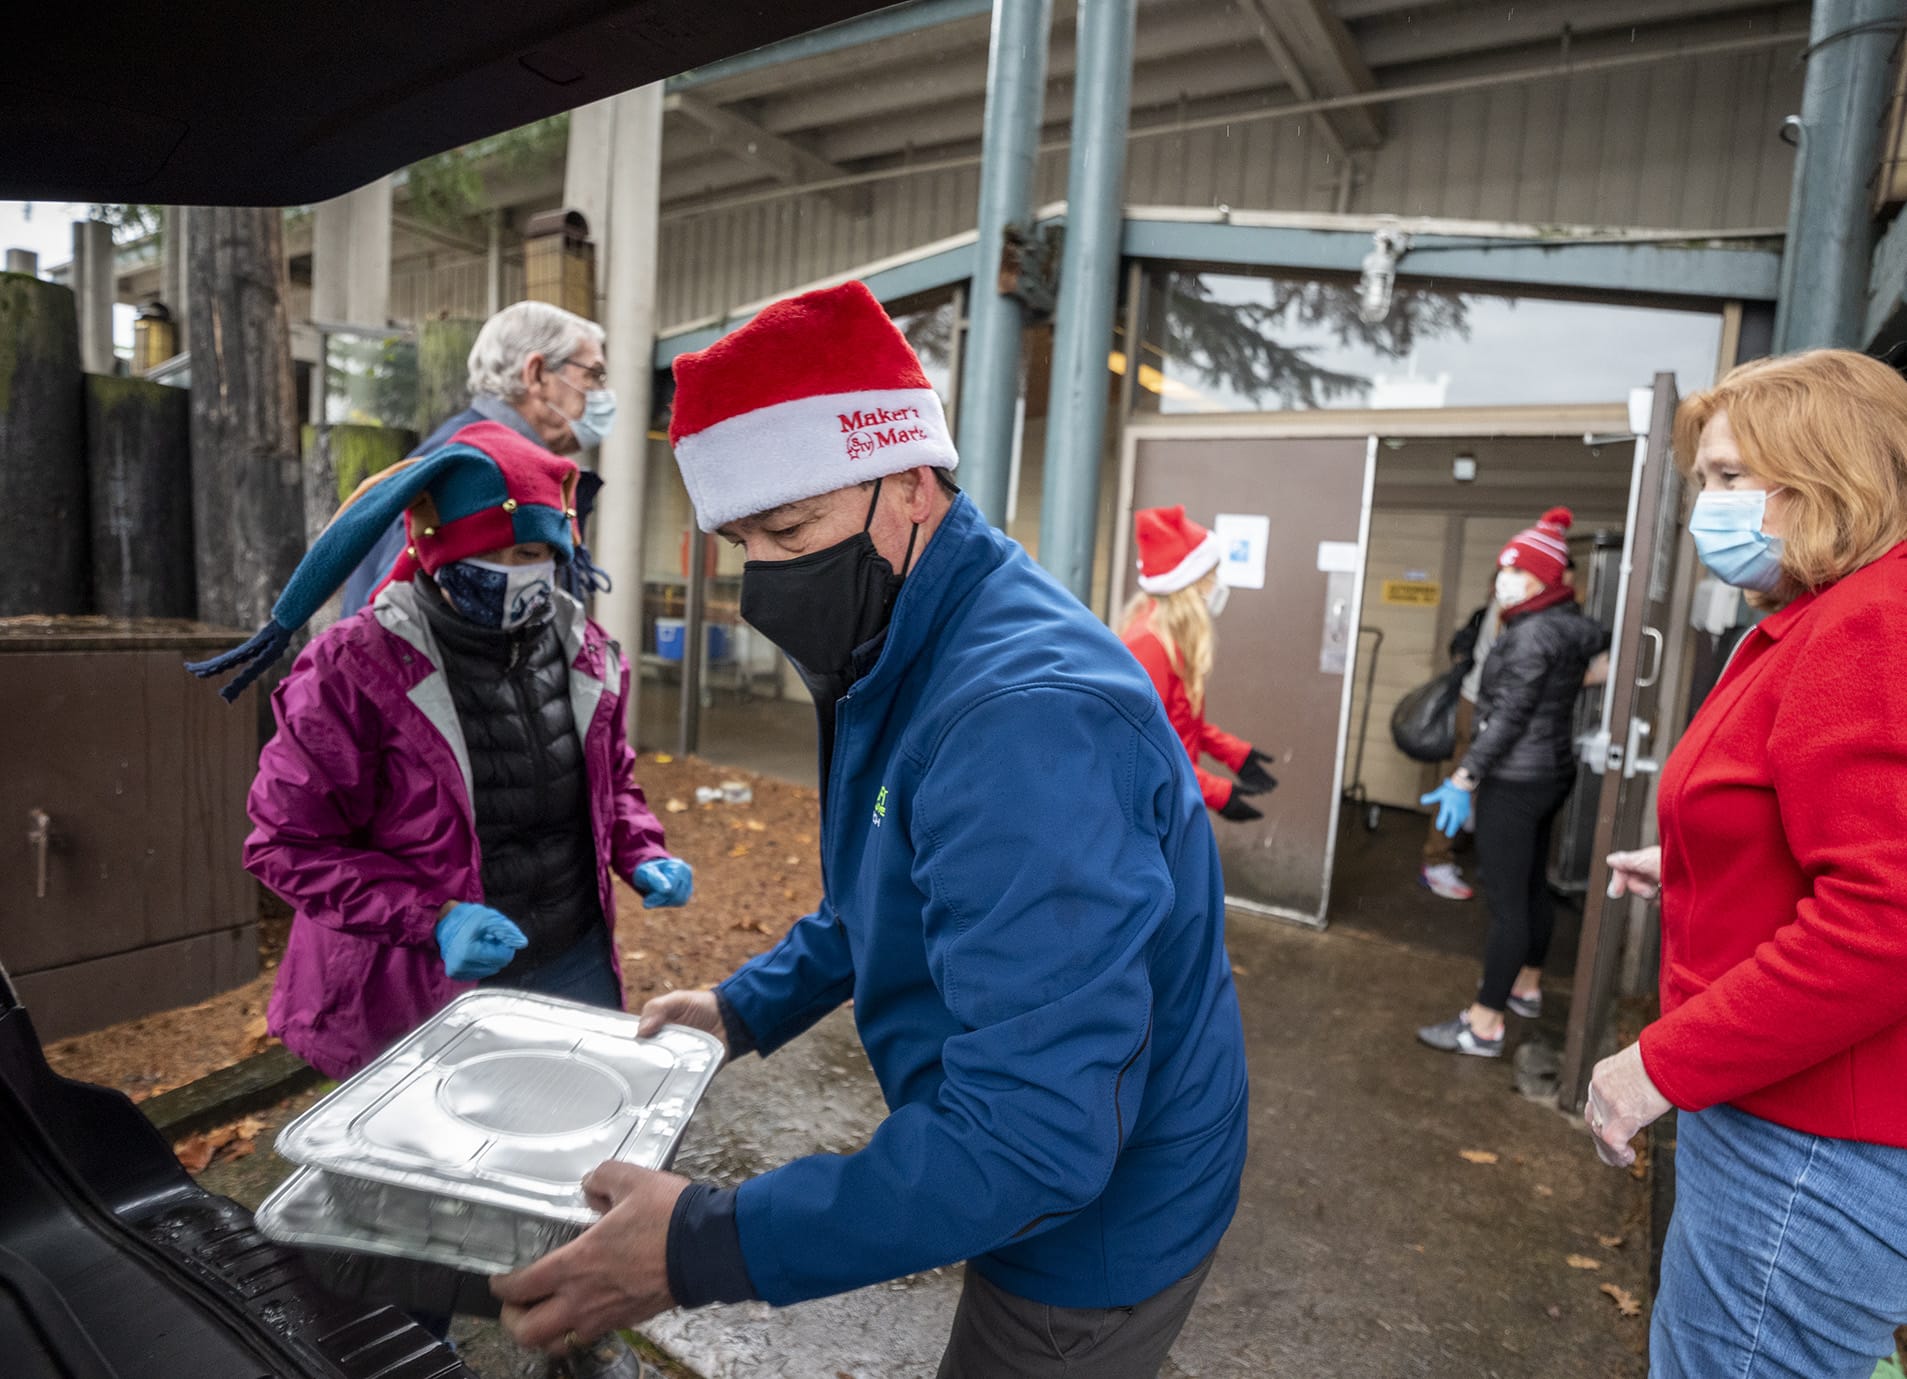 Doug Carr, center, of Battle Ground, and others load a vehicle that will deliver Christmas meals to a location in Vancouver on Friday at a Christmas meal distribution event at WareHouse '23.